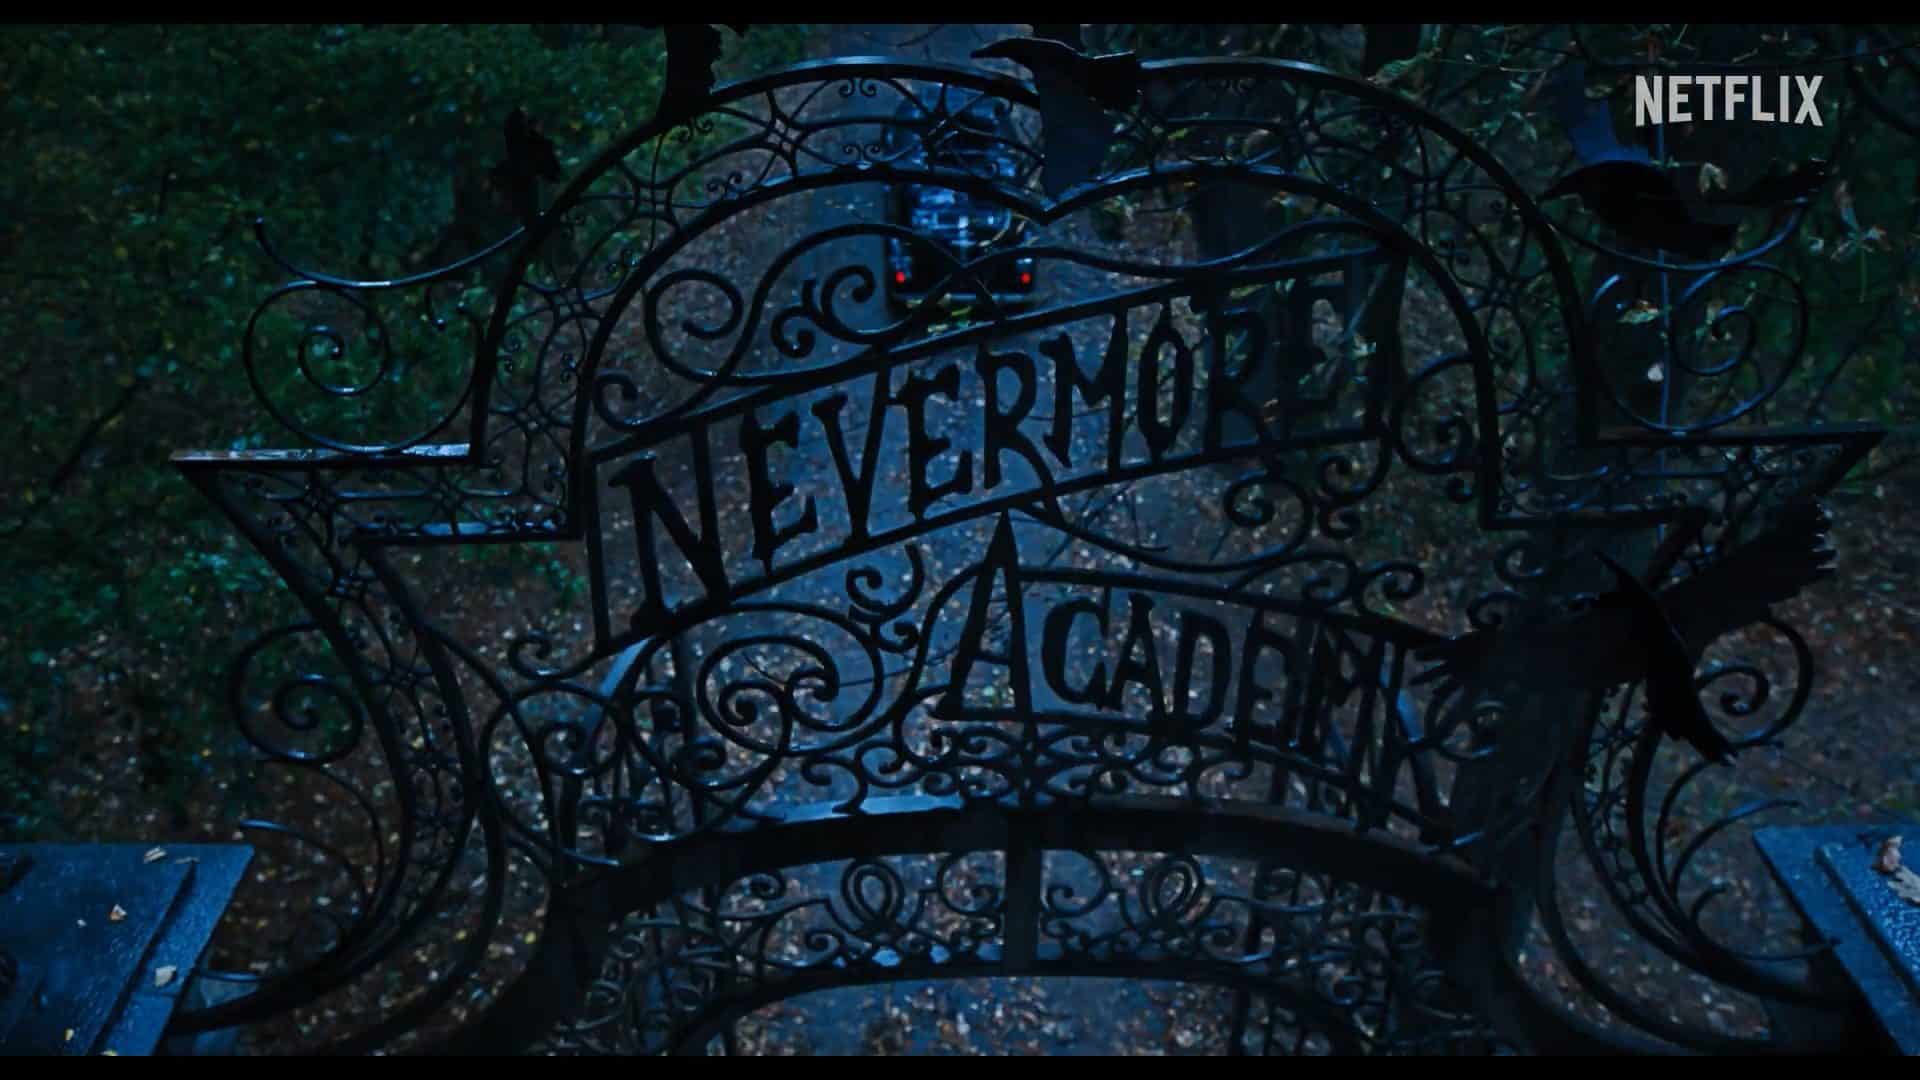 The gate of the Nevermore Academy